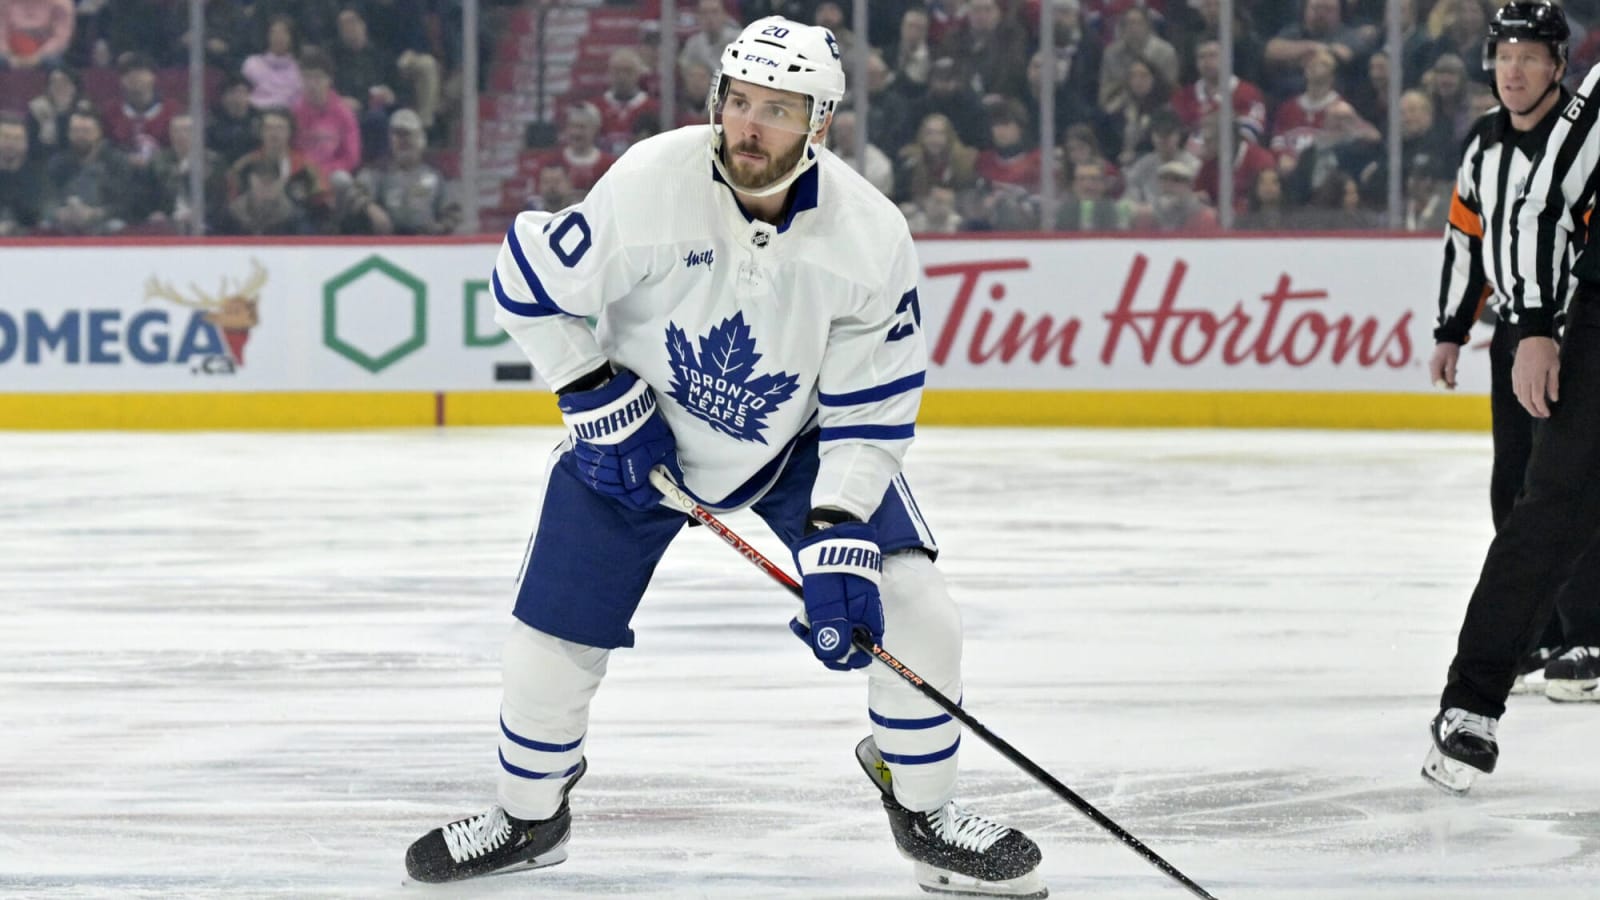 The trade deadline hasn’t led to increased confidence in the Maple Leafs